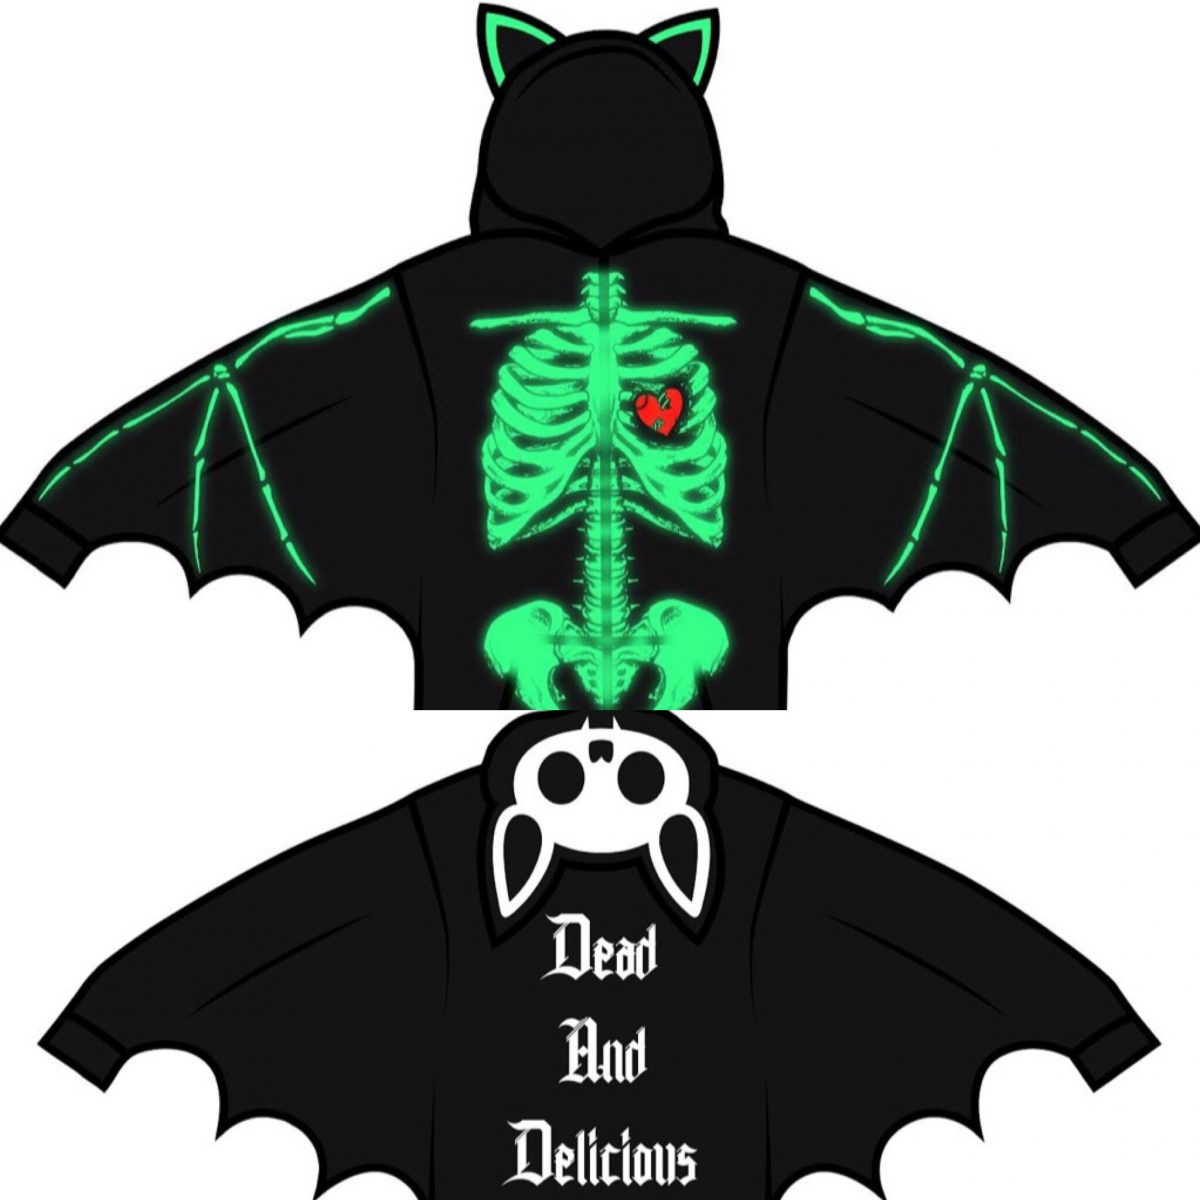 Dead And Delicious Bat Wing Glow In The Dark Ribcage Hoodie With Bat Ears! 2.0 (FREE GIFT INCLUDED) - thedarkarts